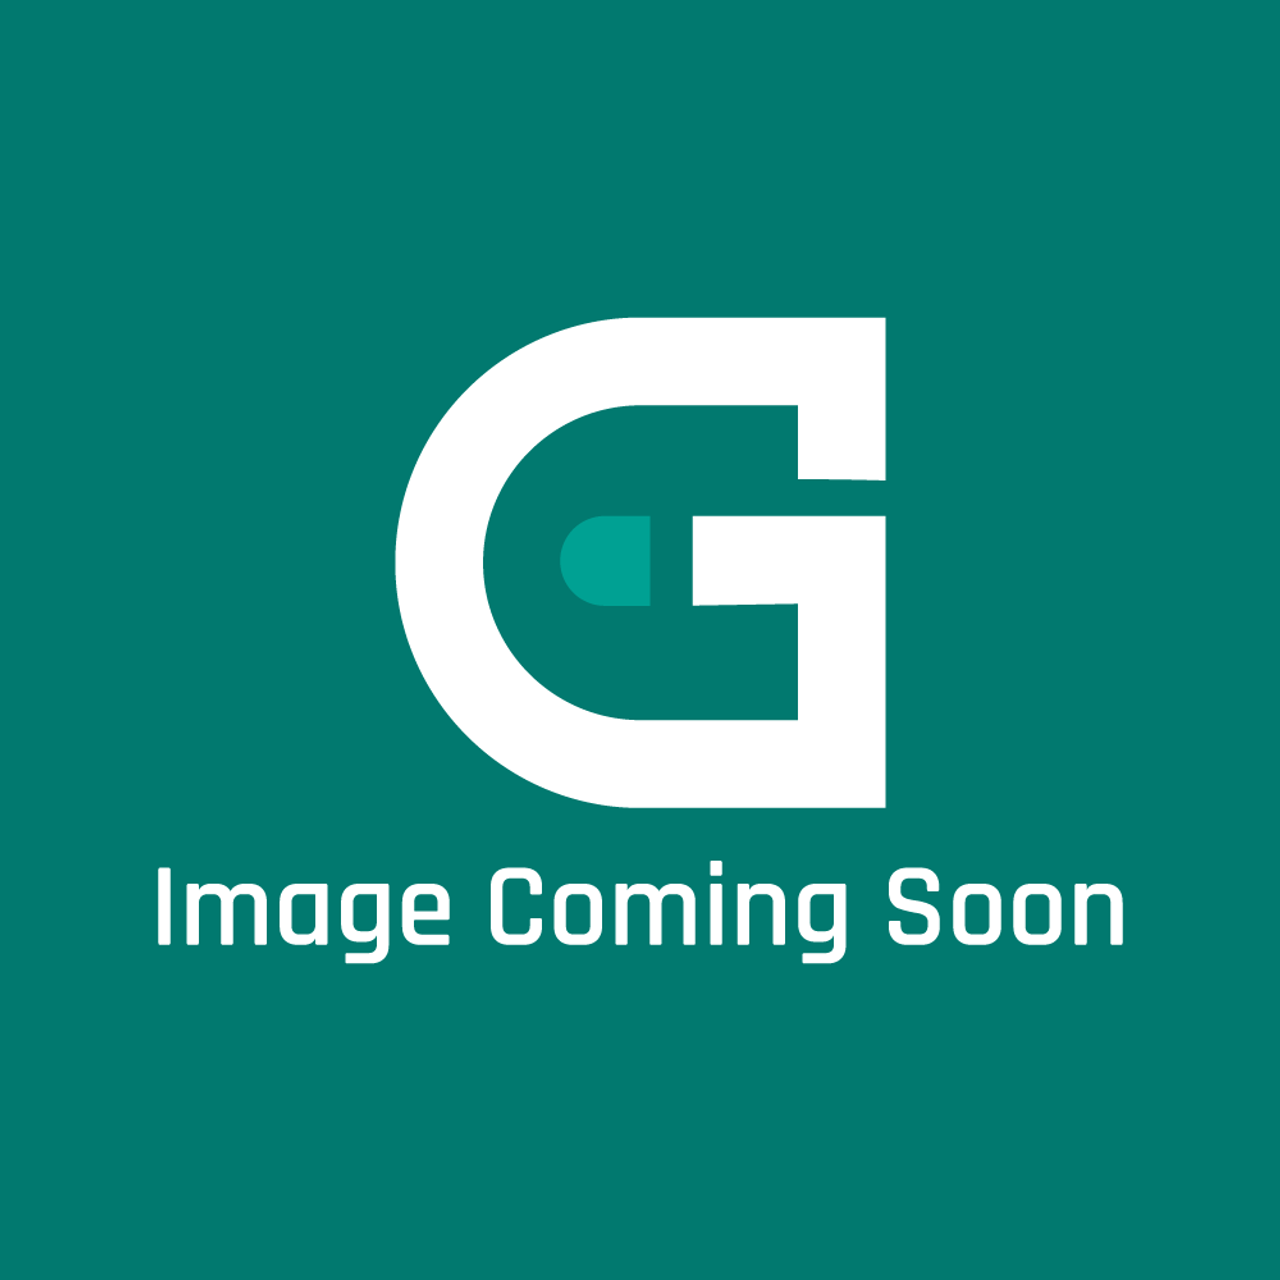 Frigidaire - Electrolux 241709805 Ice Maker - Image Coming Soon!